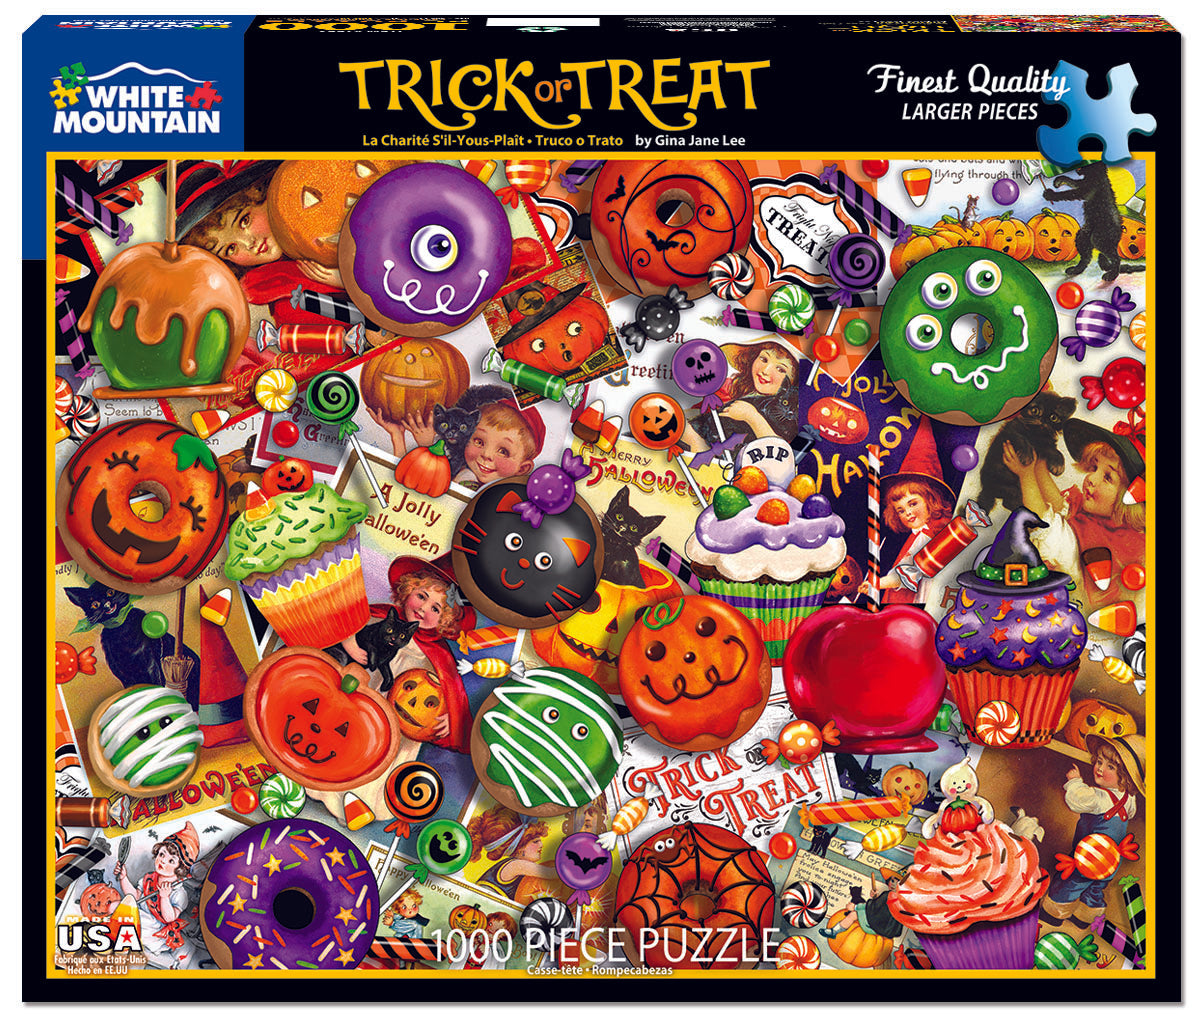 1000 Piece Jigsaw Puzzle - Trick or Treat – White Mountain Puzzles